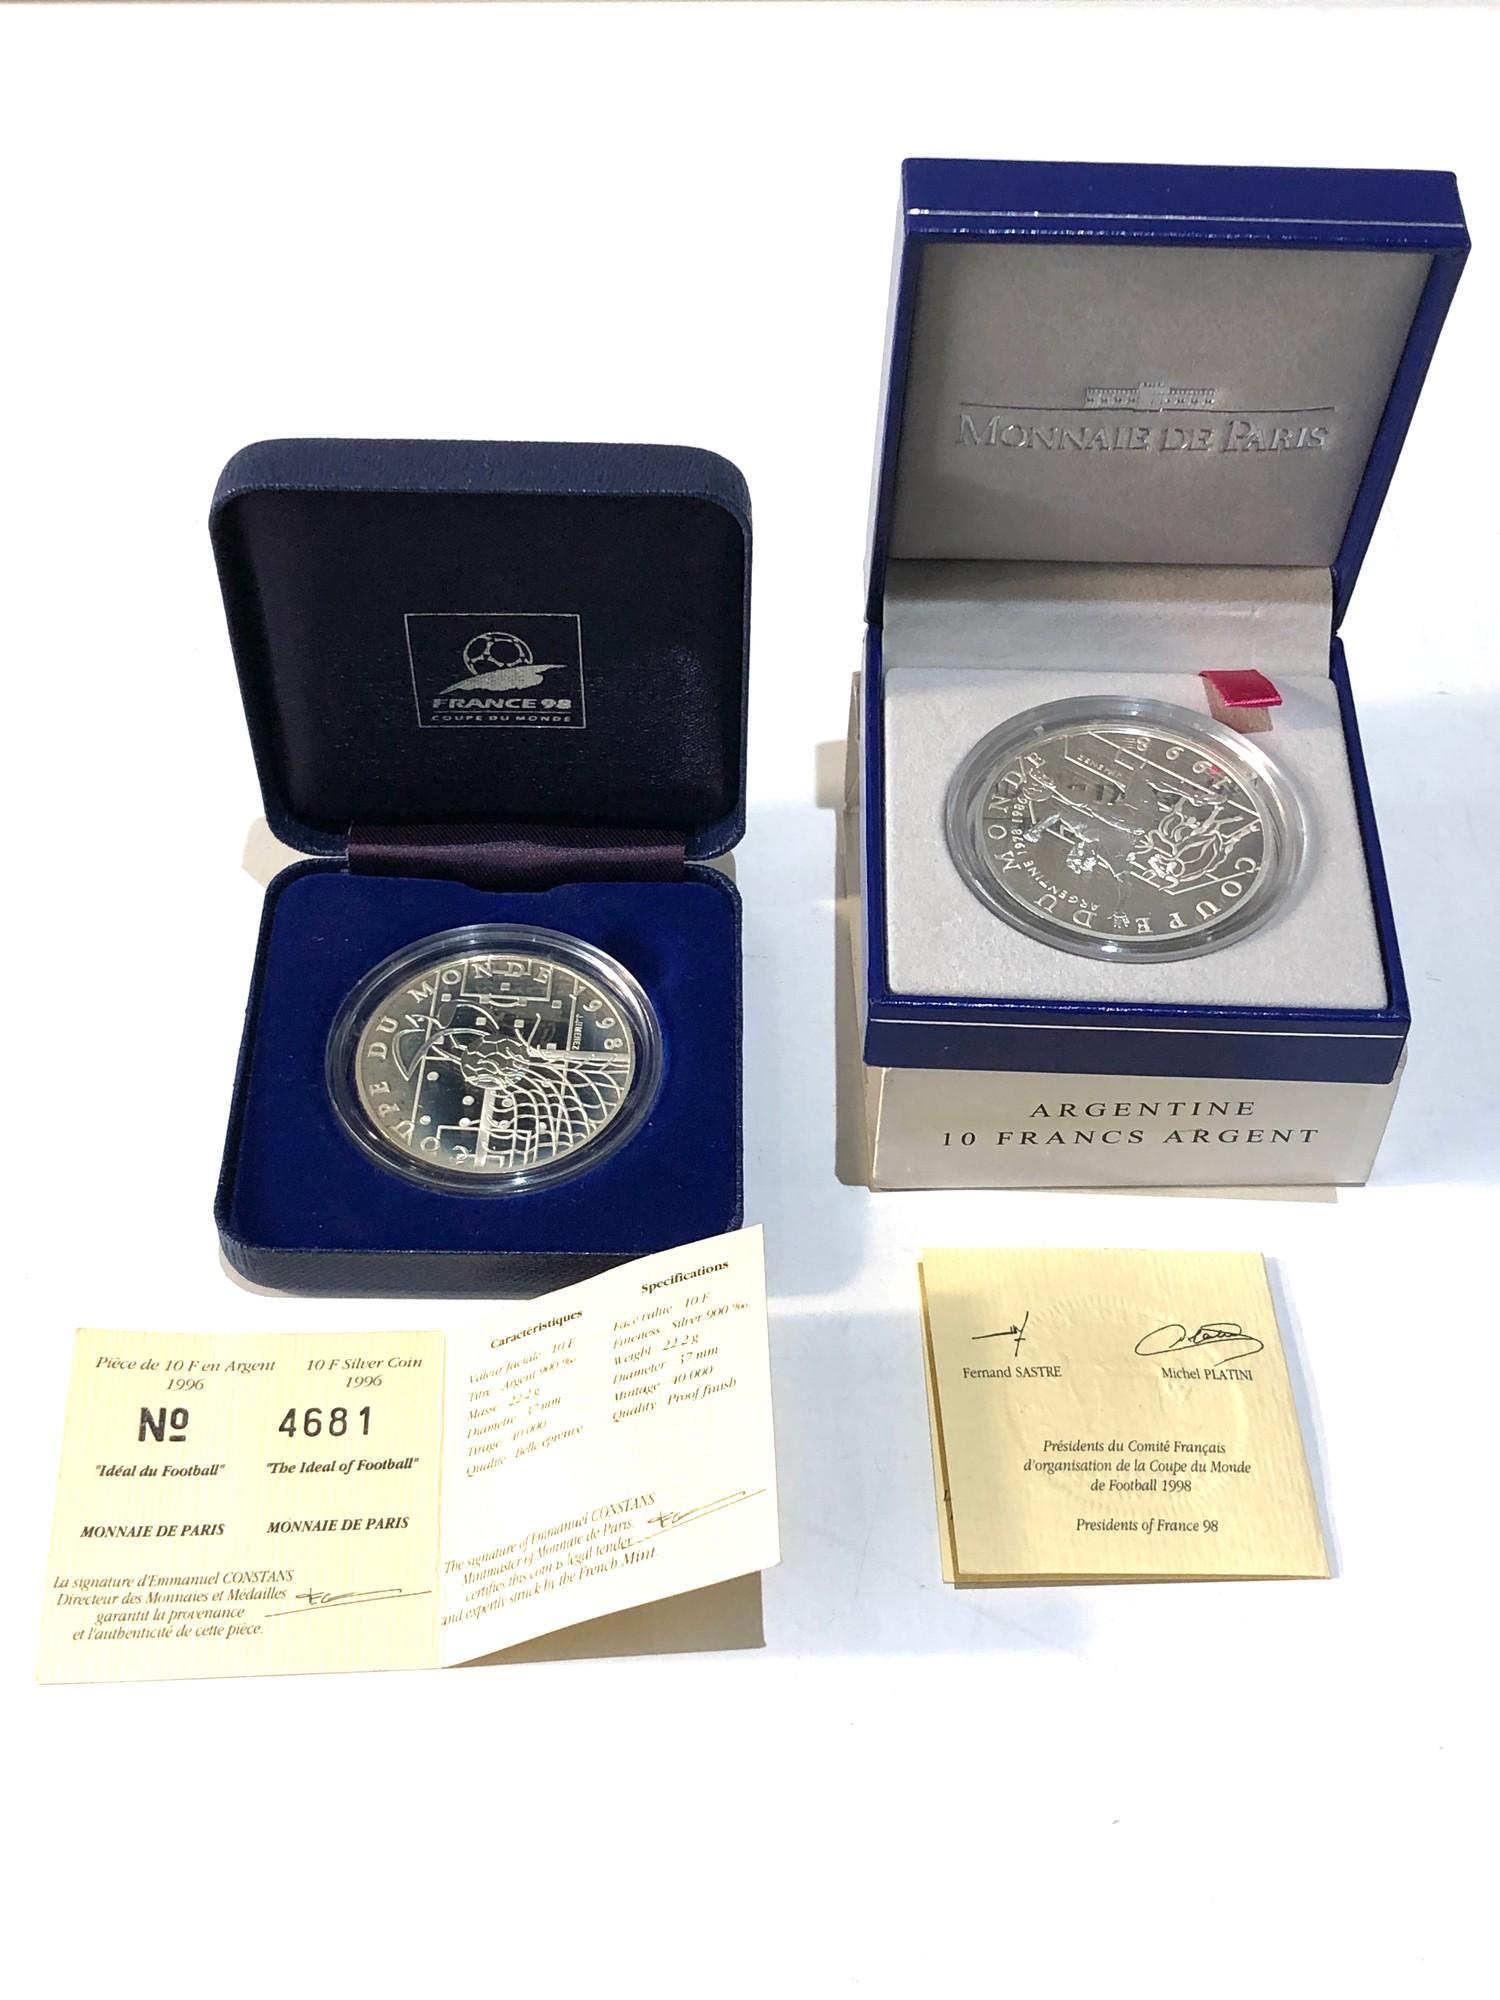 2 1998 proof silver france 98 coins with b.a.c